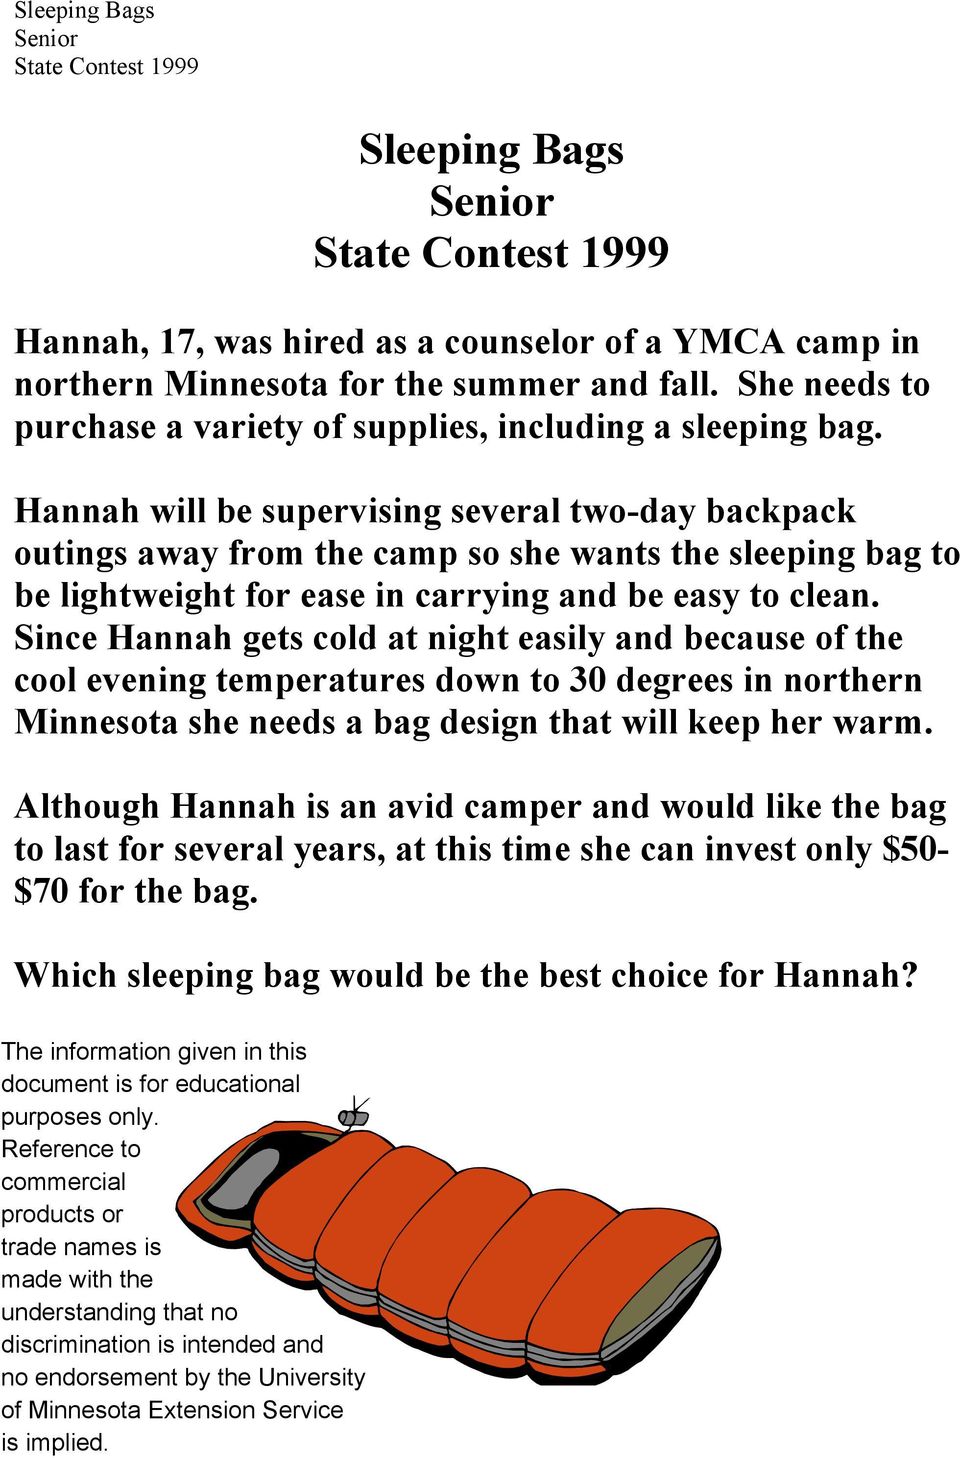 Since Hannah gets cold at night easily and because of the cool evening temperatures down to 30 degrees in northern Minnesota she needs a bag design that will keep her warm.